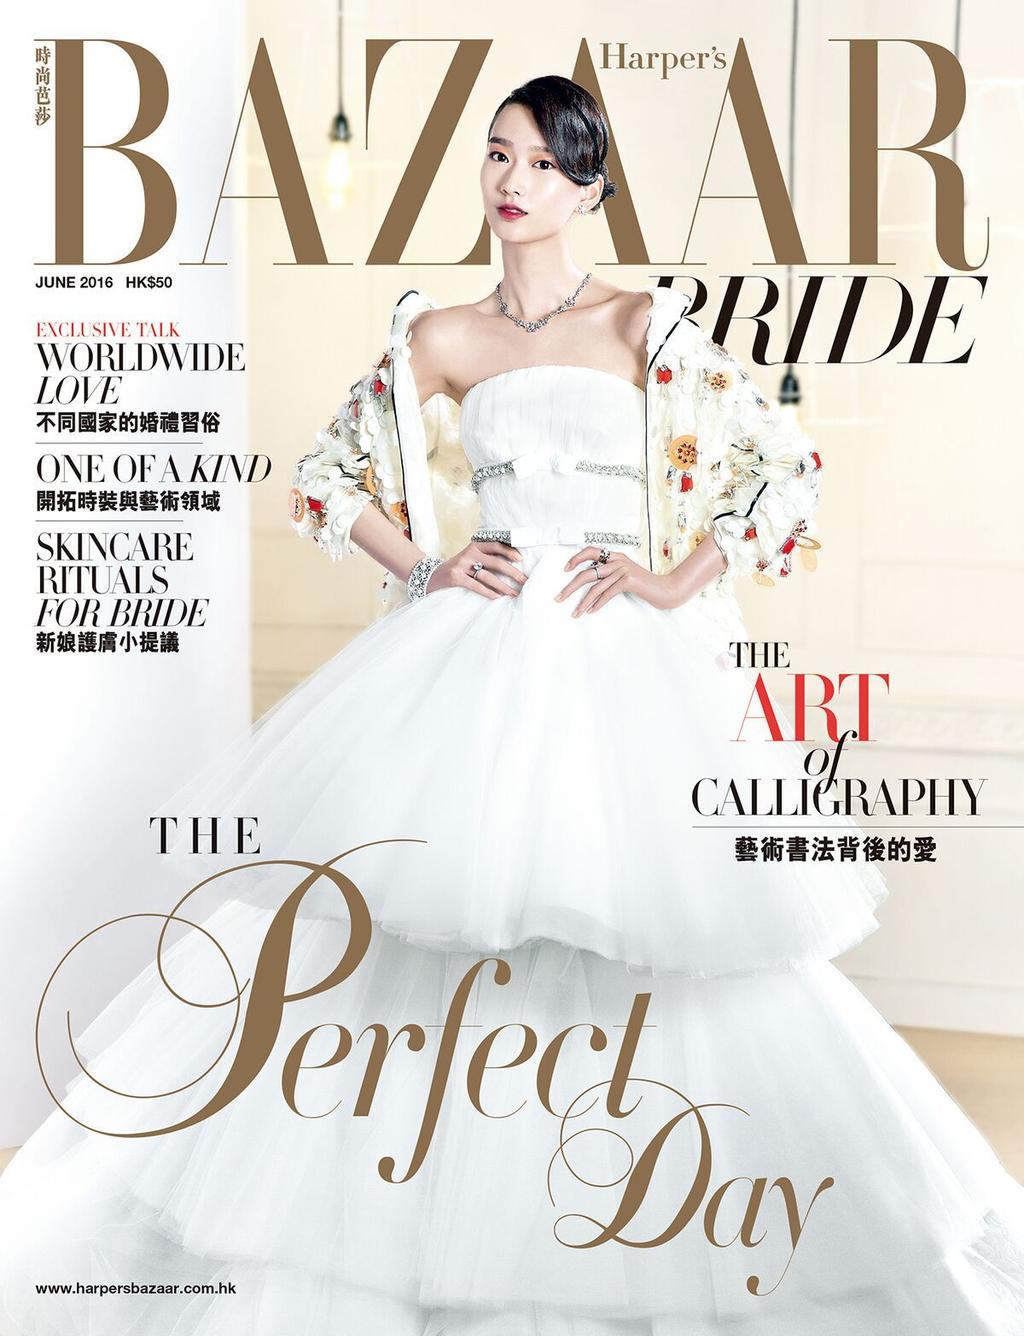 BAZAAR Bride 2018 Rate Card Back Cover Inside Front Cover Spread Inside Back Cover Full page (FP) Double page spread (DPS) Advertising Rates (in HK$) 126,000 176,000 95,000 51,000 102,000 BAZAAR